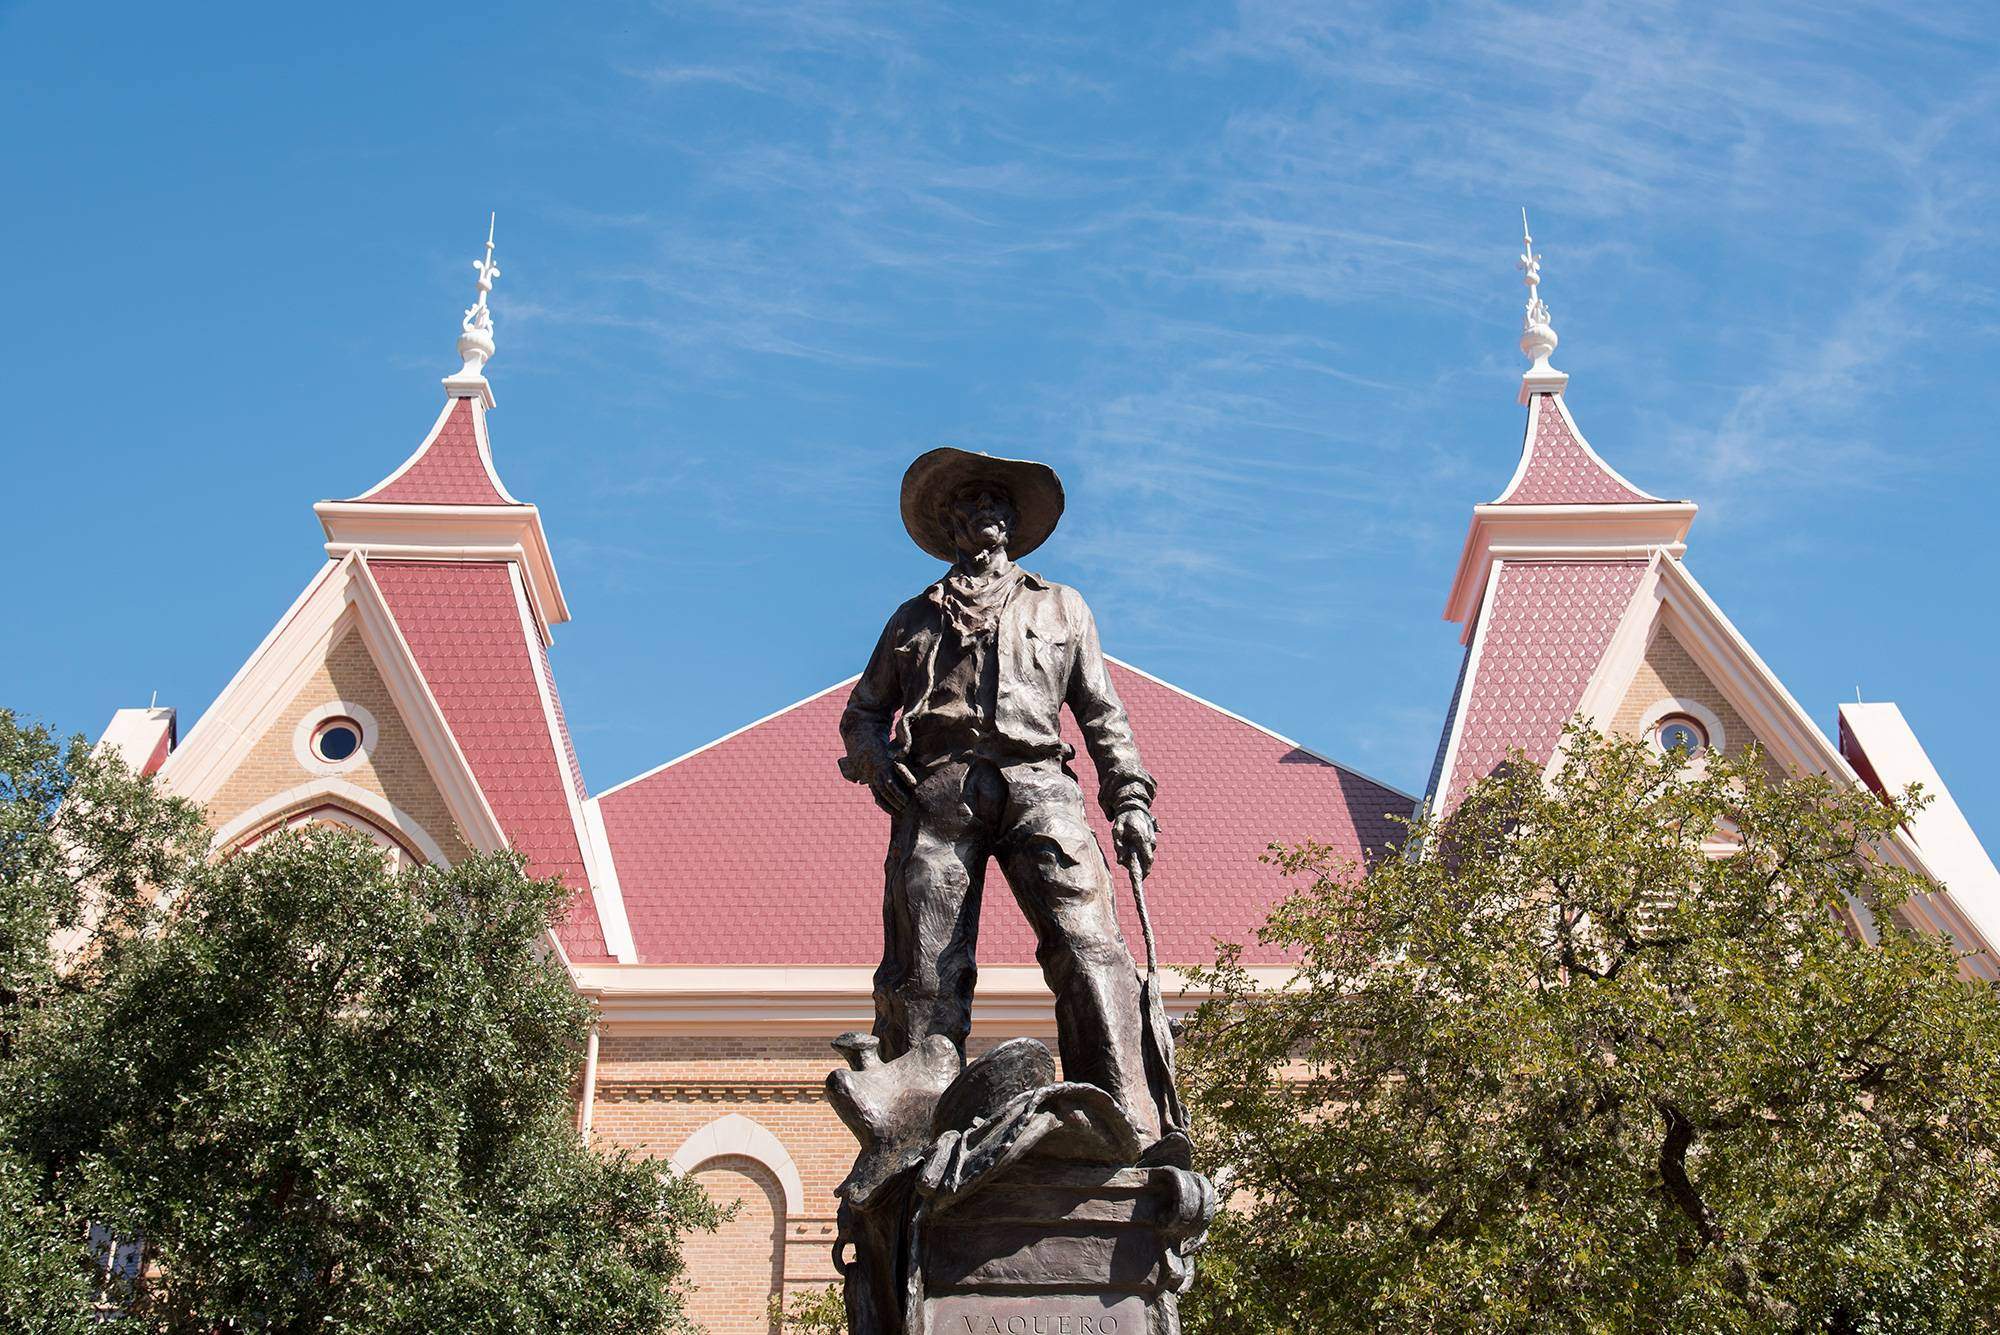 vaquero and old main image